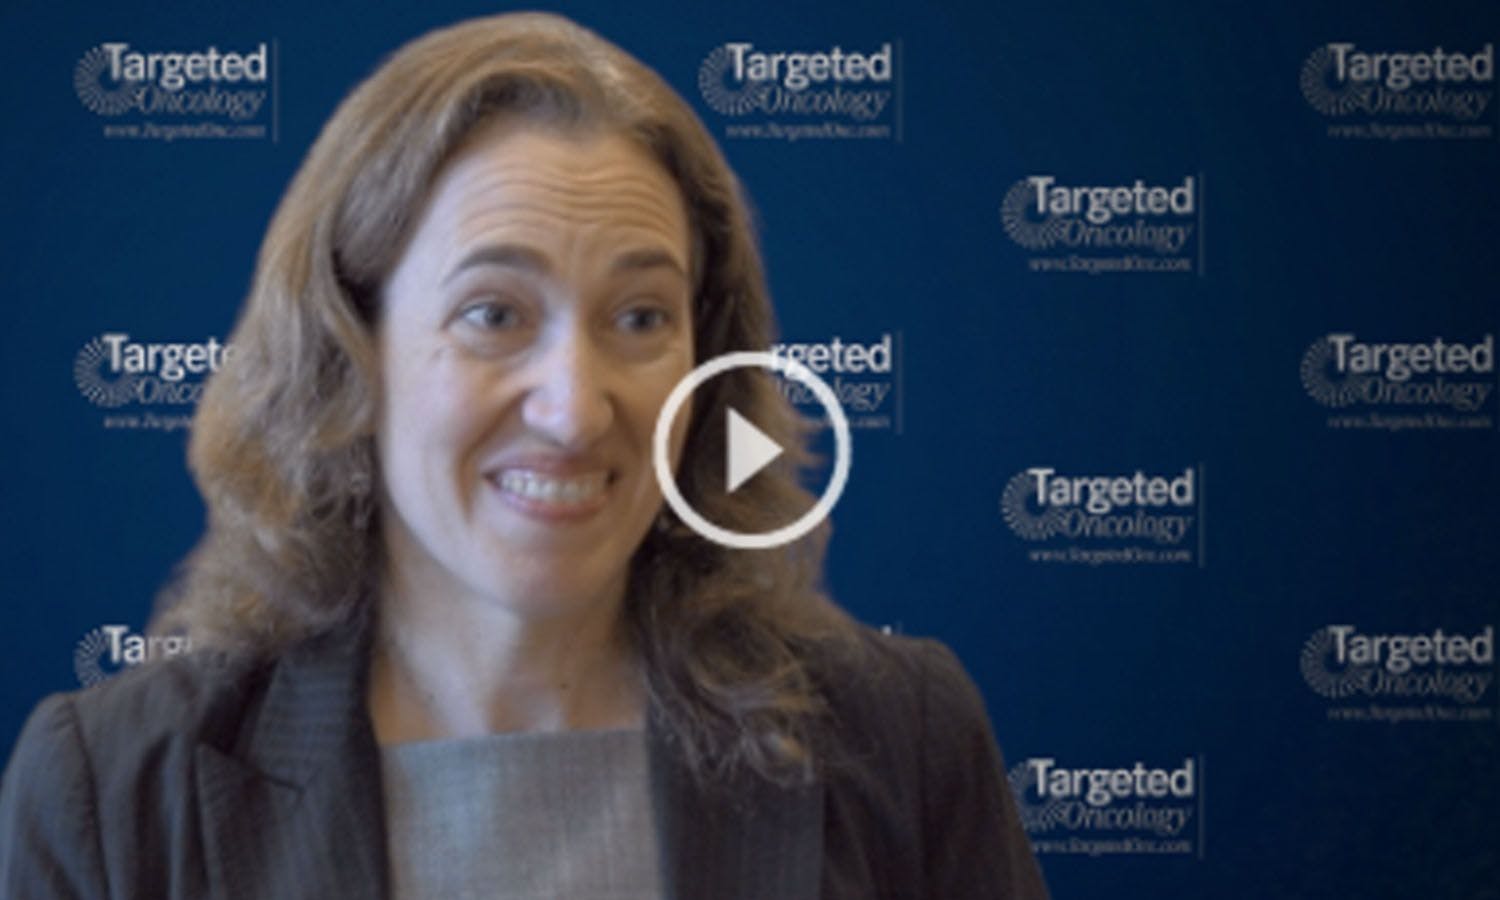 Challenges Remain to be Addressed With CAR T-Cell Therapy in DLBCL